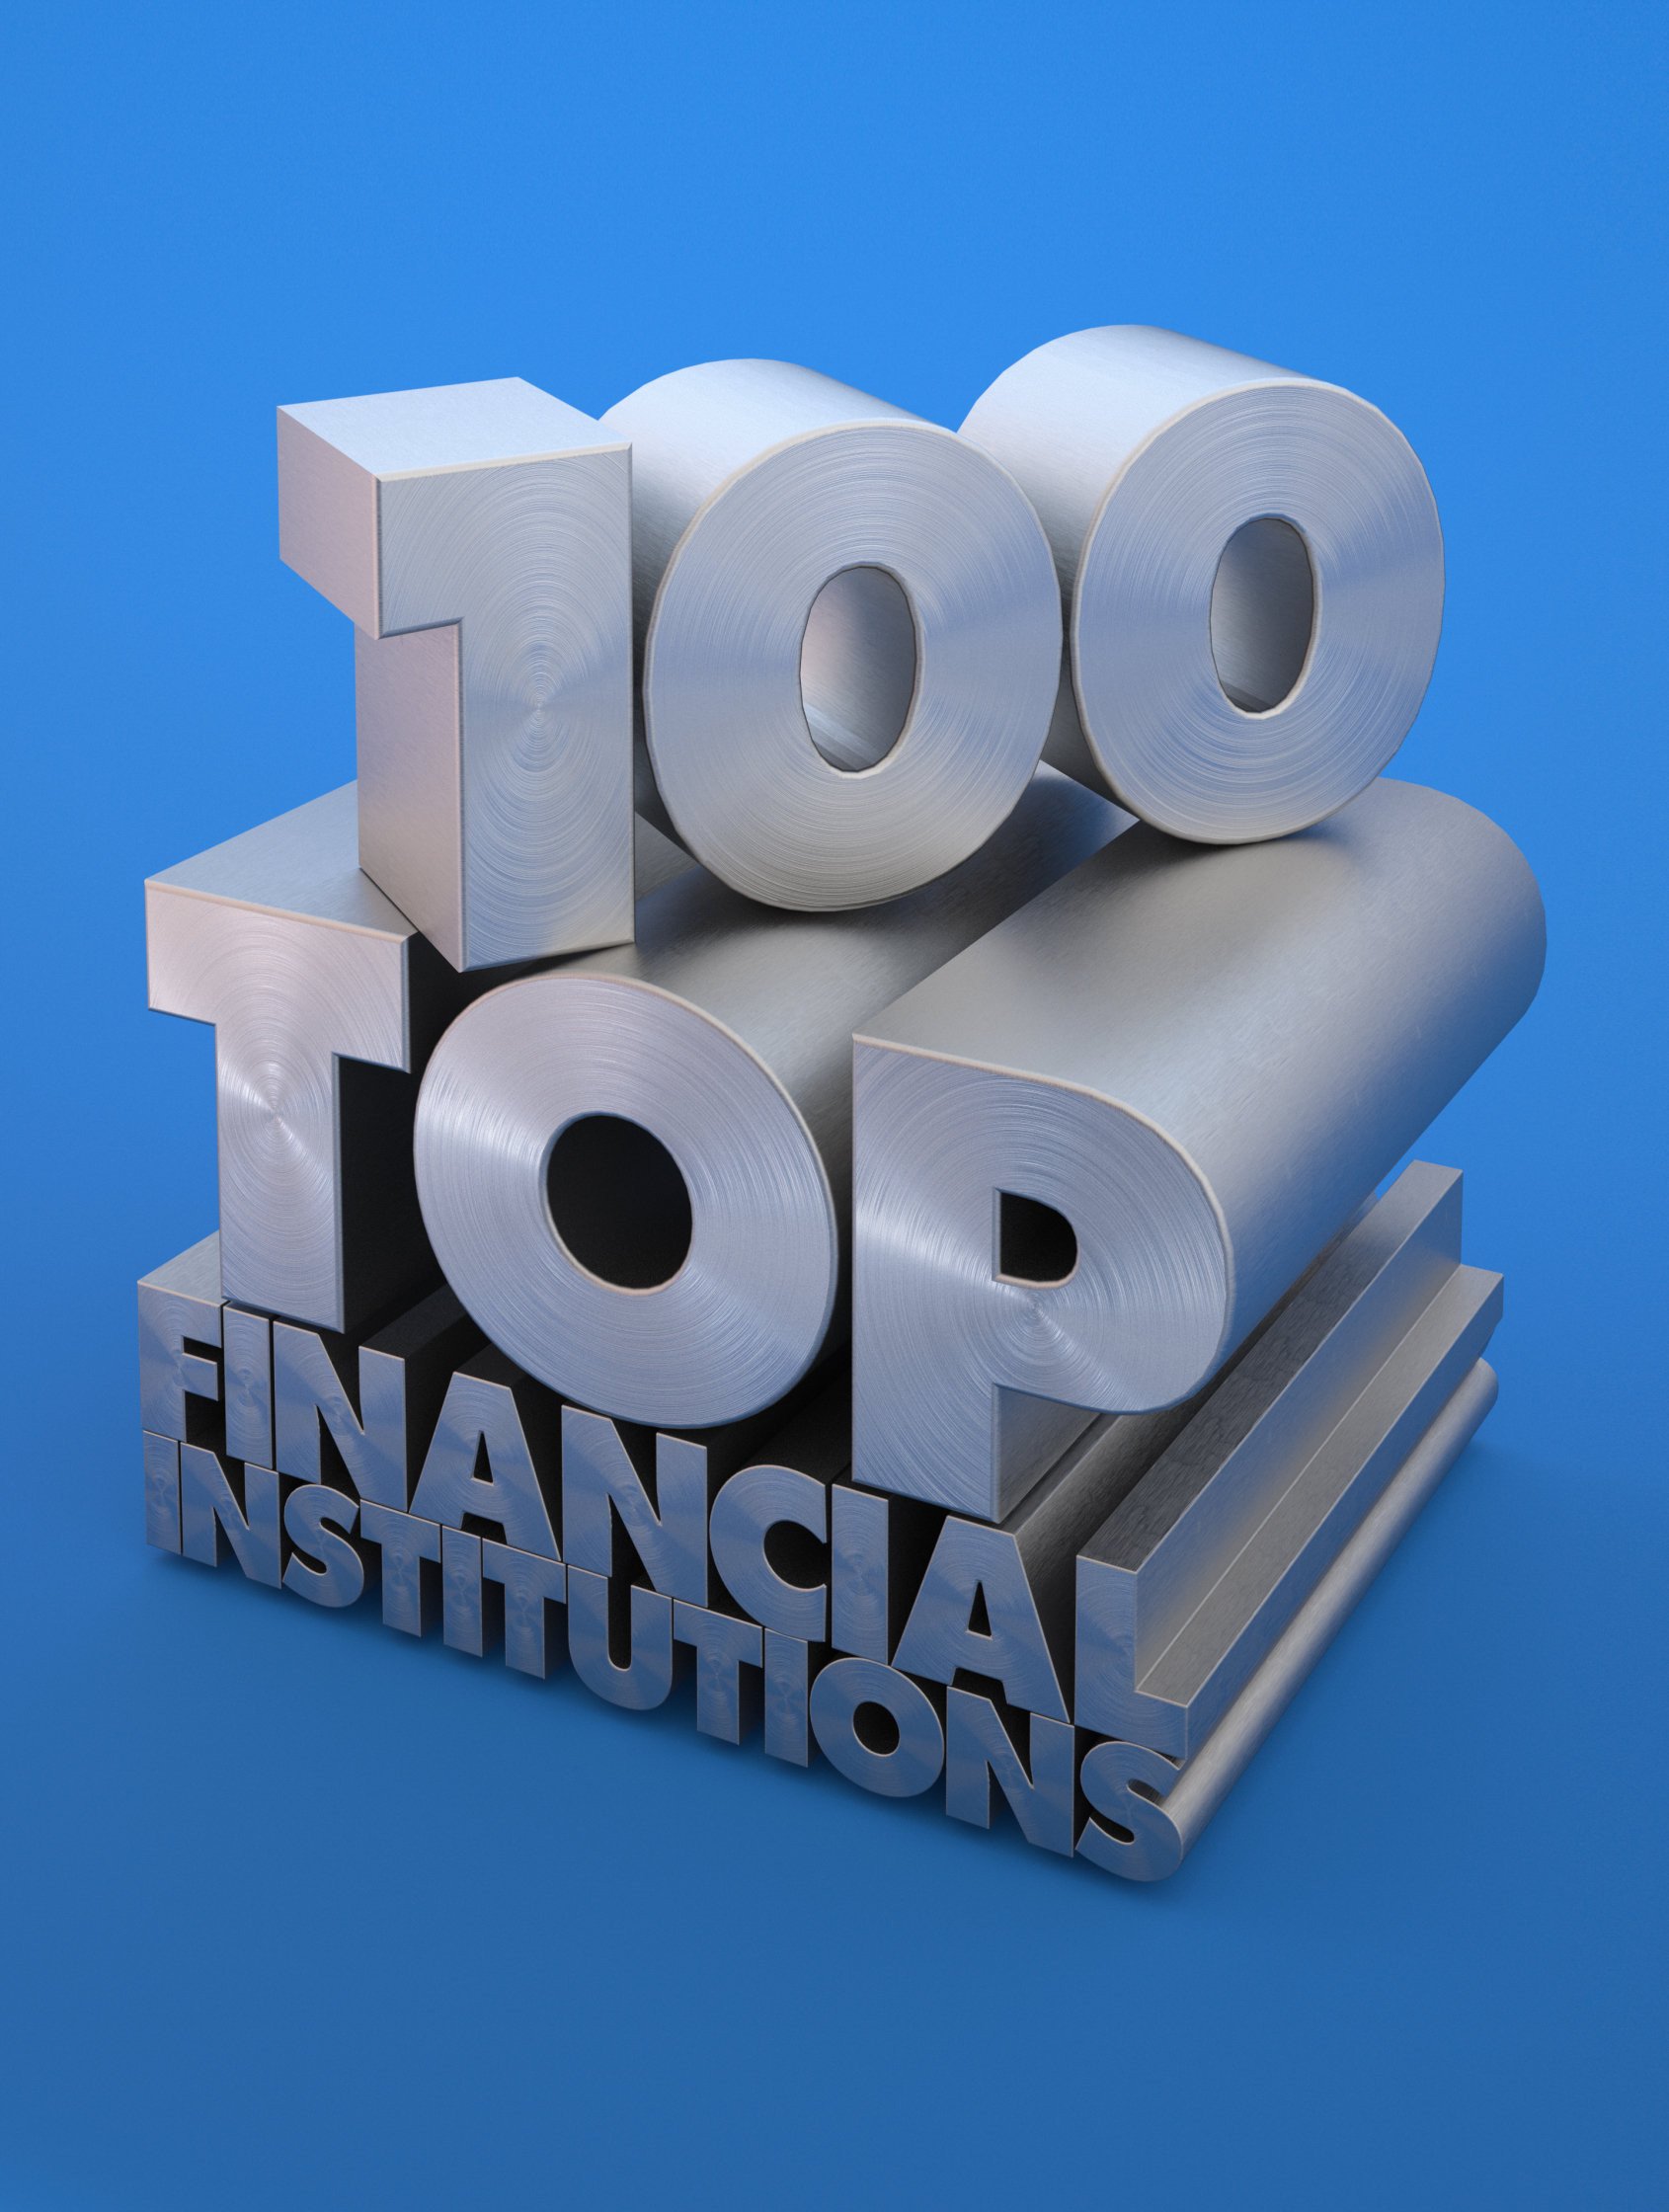 100 Top Financial Institutions